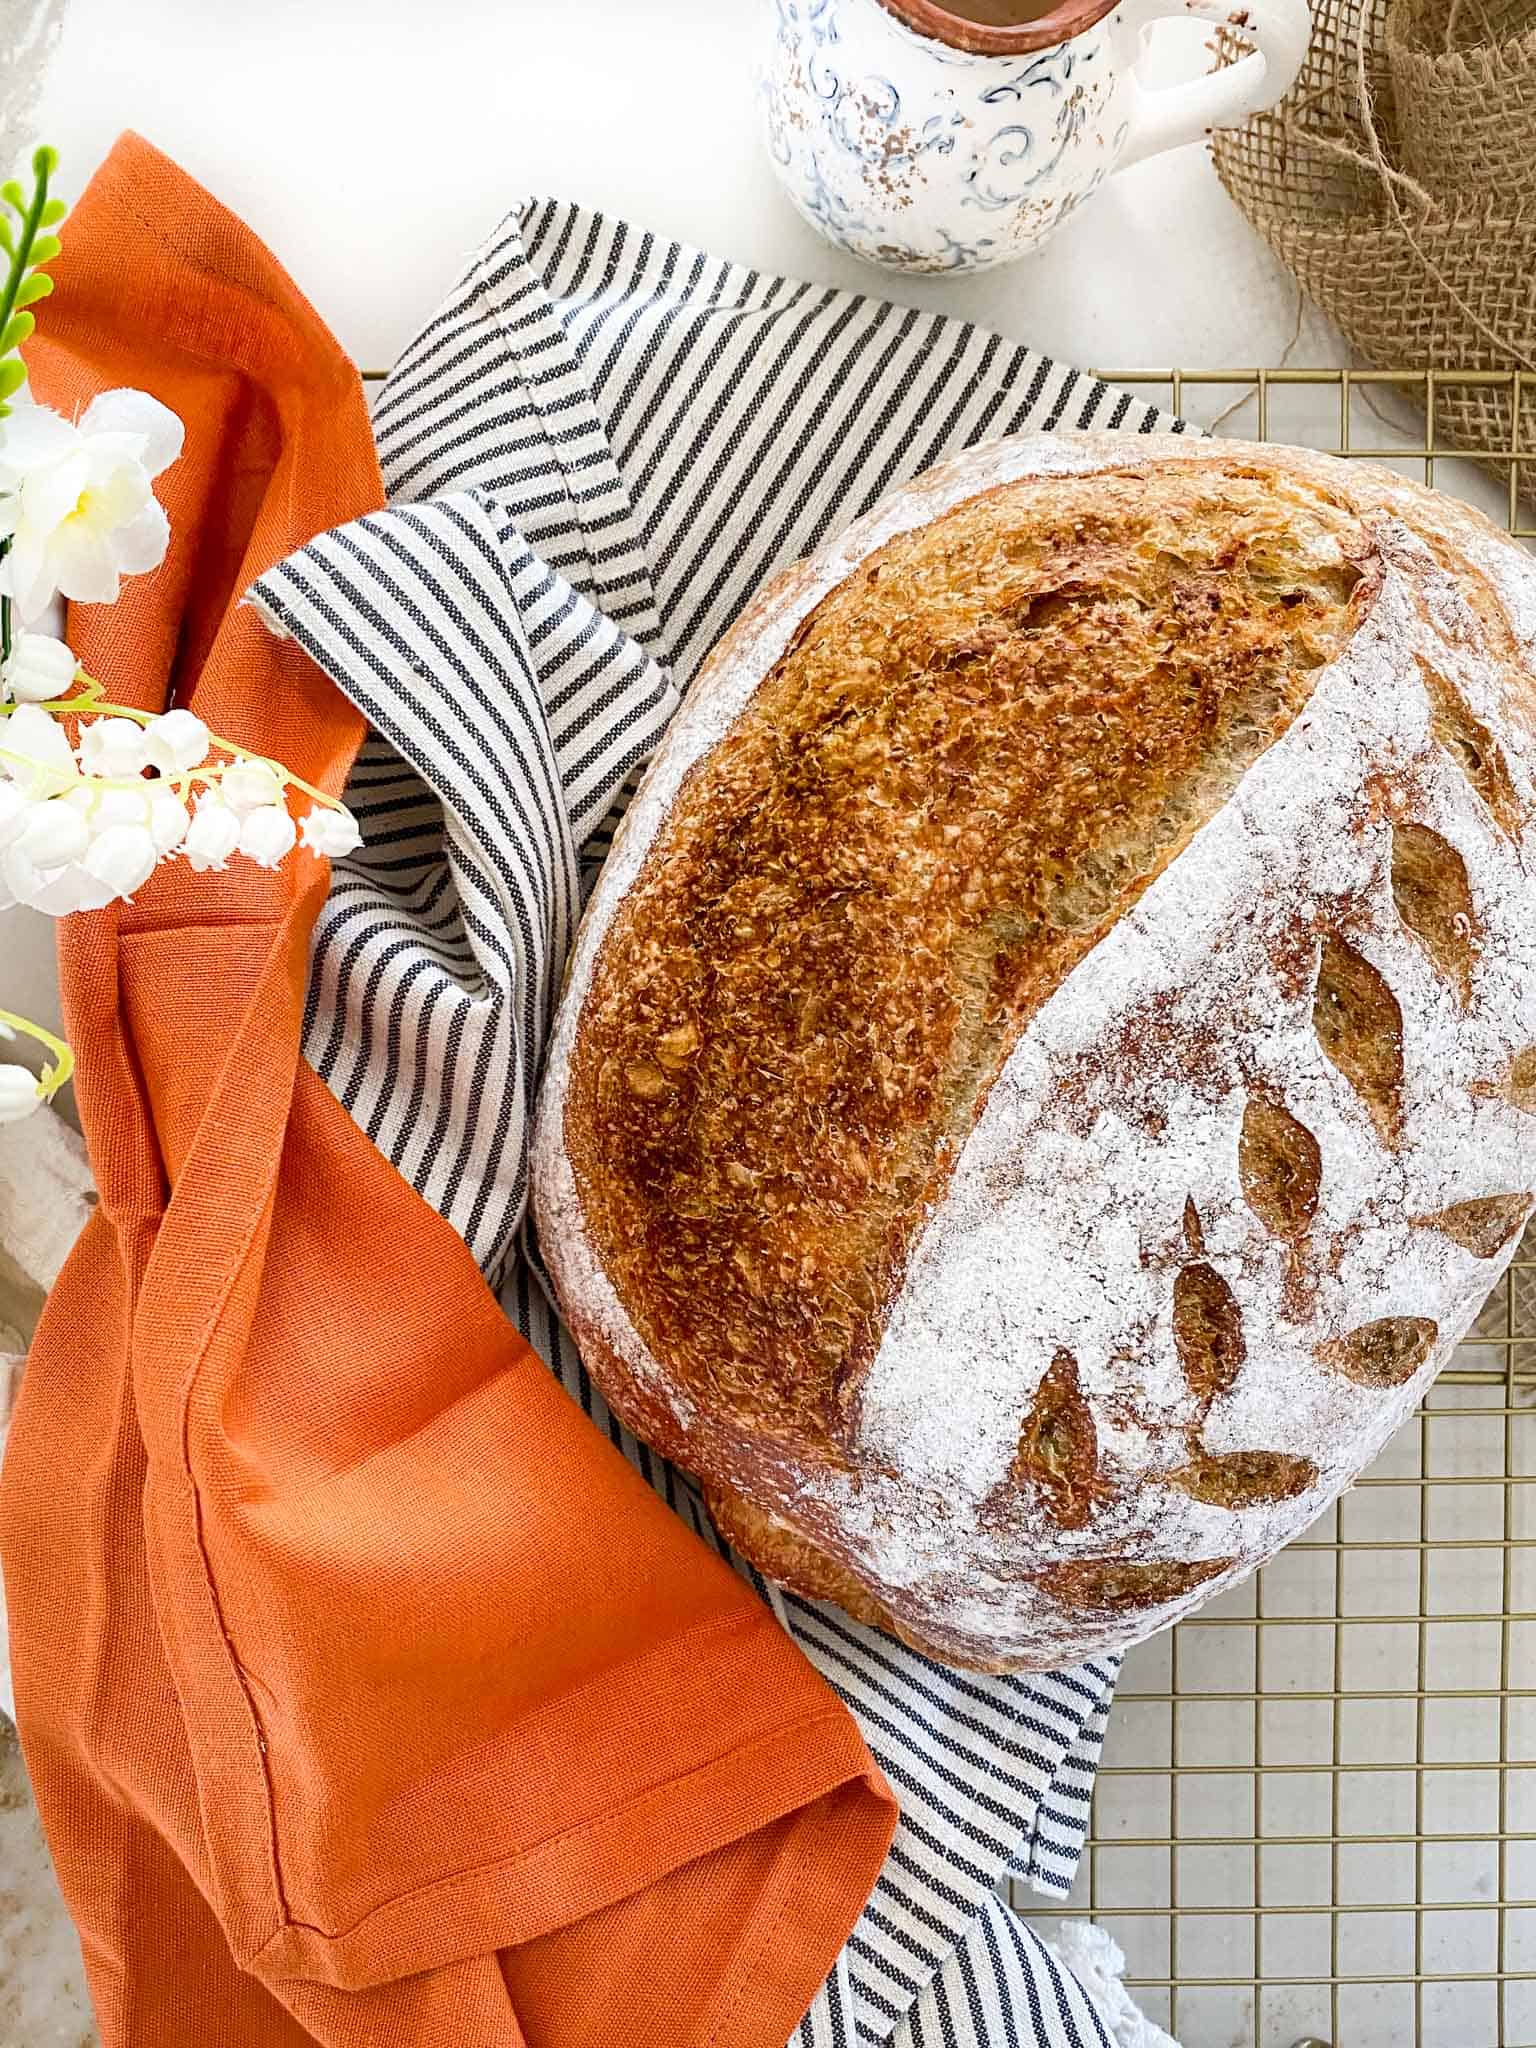 Wholegrain Sourdough Bread on a metal rack, surrounded by an orange and striped napkin and some flowers.